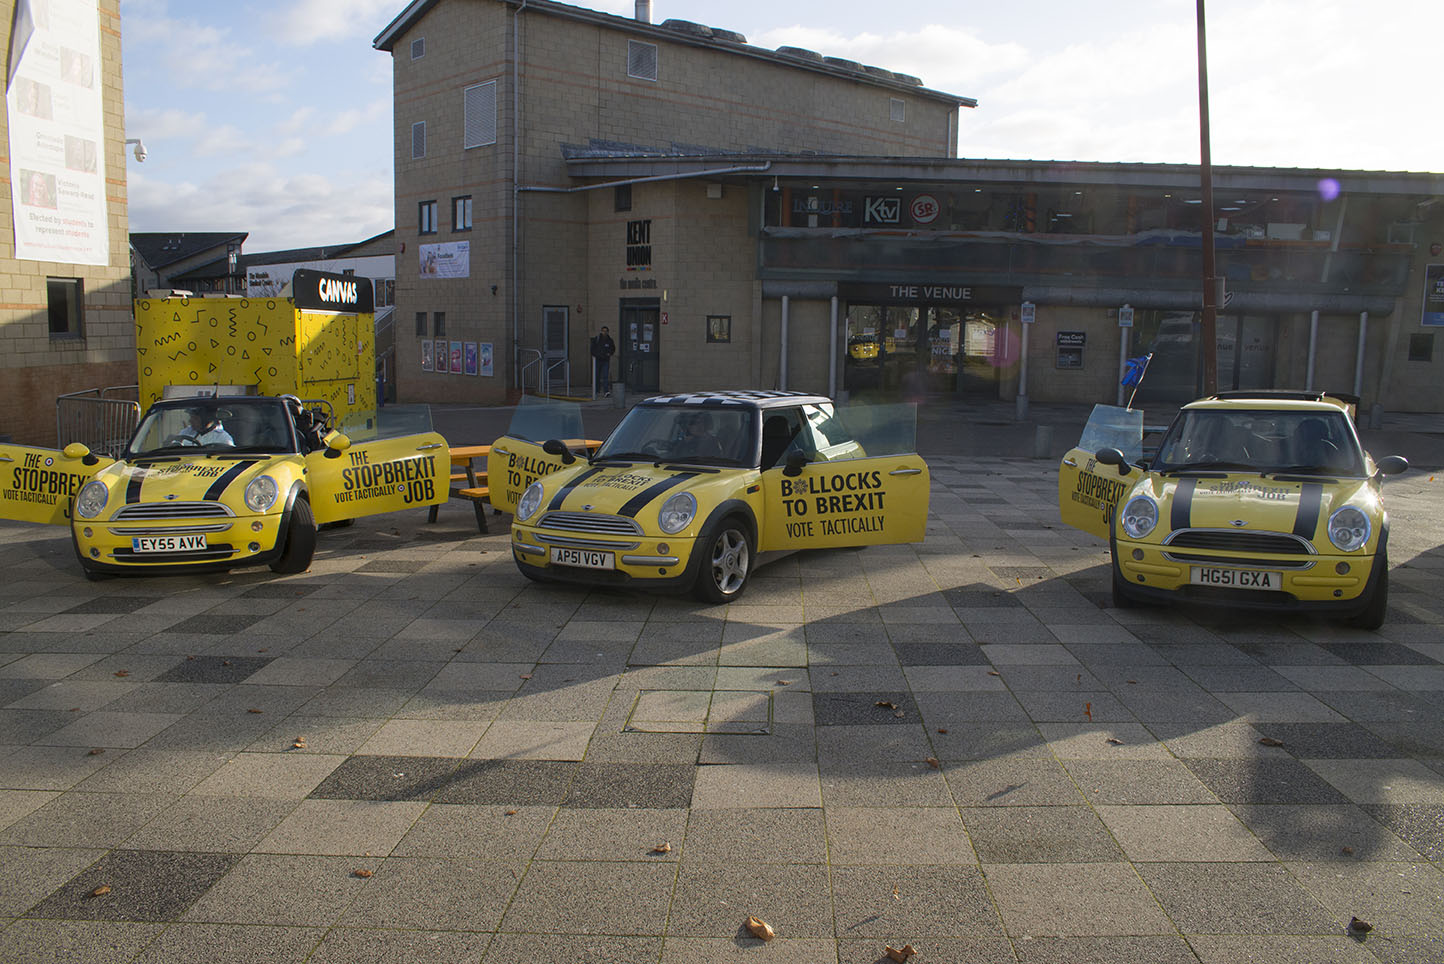 Canterbury, UK - 09 Dec 2019 - EU Flag Mafia minis visit University of Kent, Canterbury in support tactical voting for Labour candidate (and sitting MP) Rosie Duffield during the 2019 General Election. The campaign group EU Flag Mafia crowdfunded the cars to promote tactical voting.